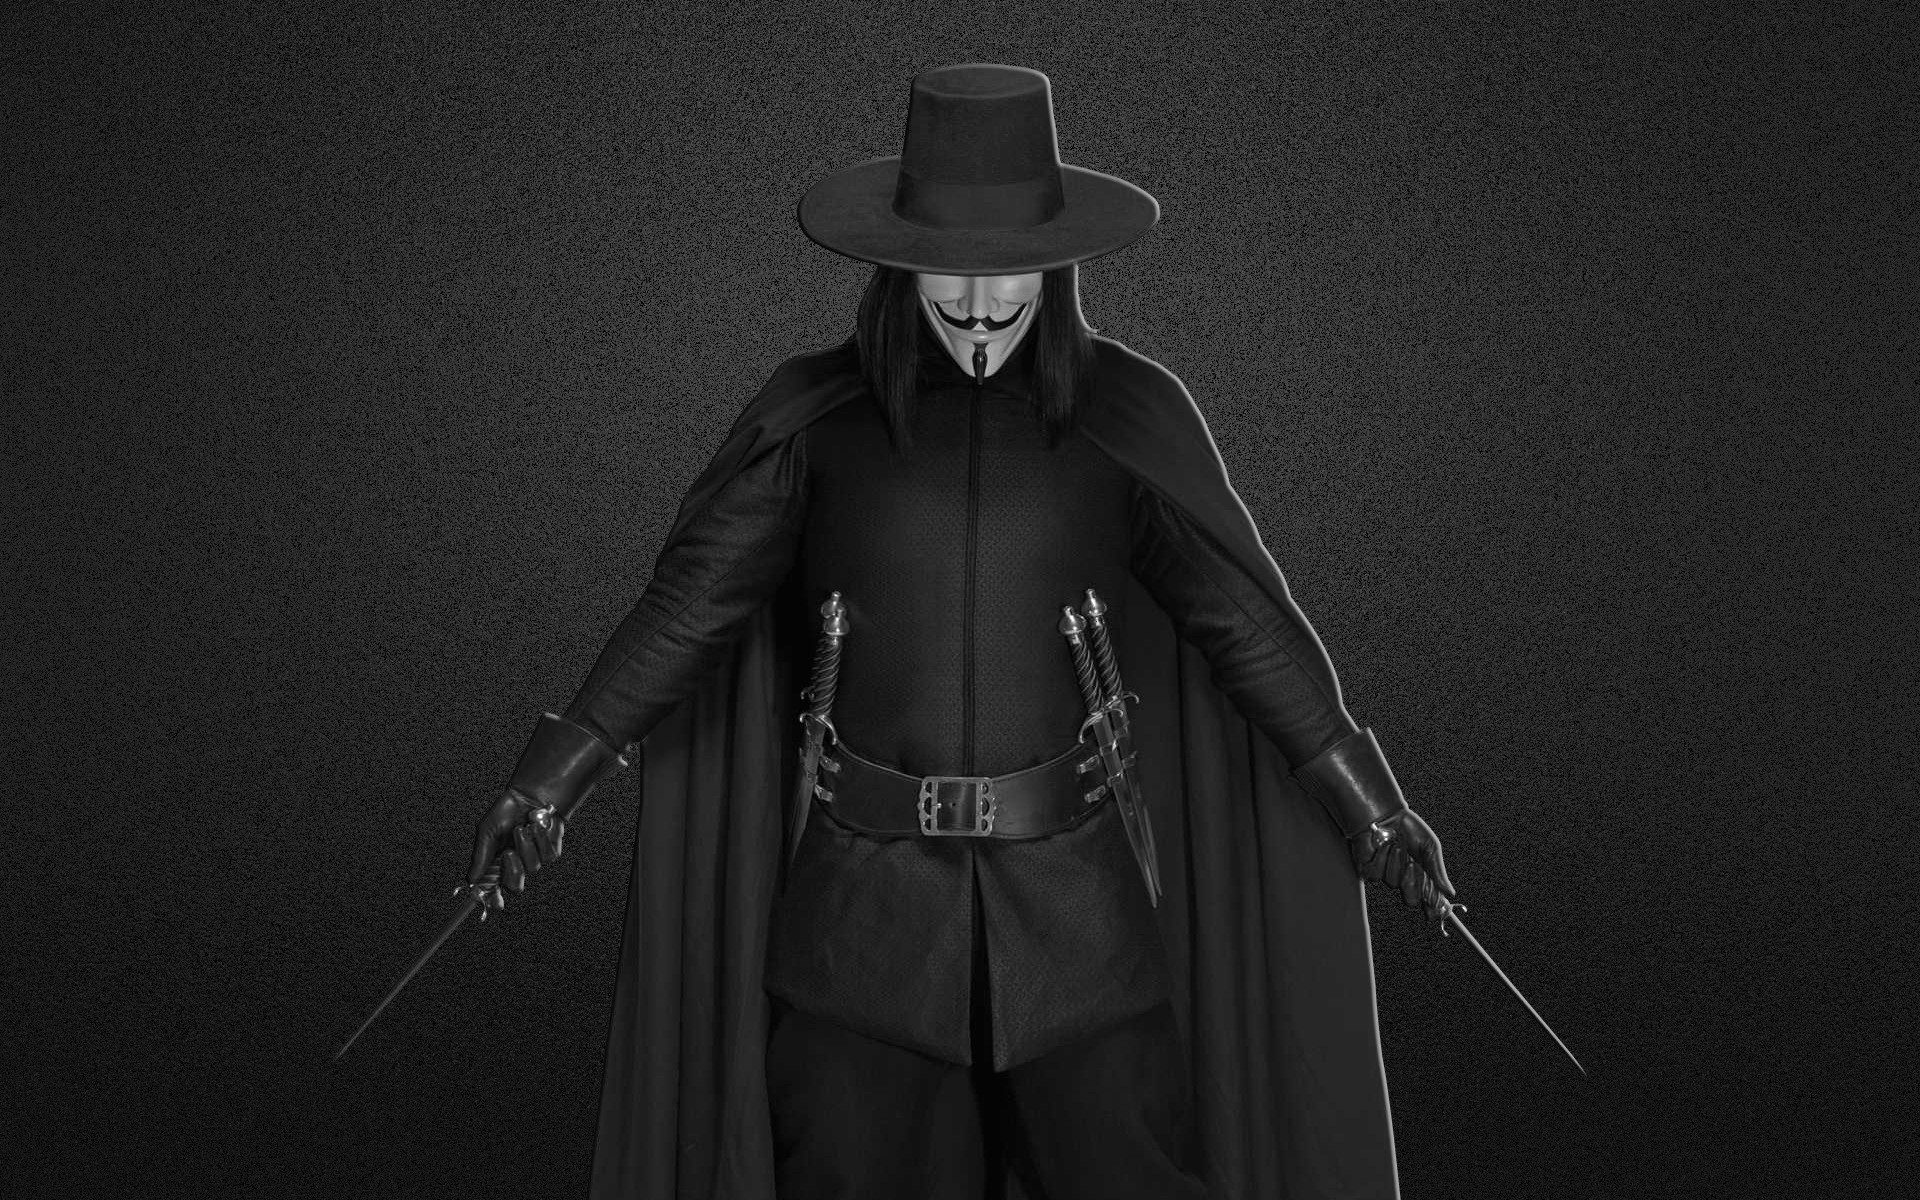 General 1920x1200 V for Vendetta Anonymous (hacker group) movies monochrome